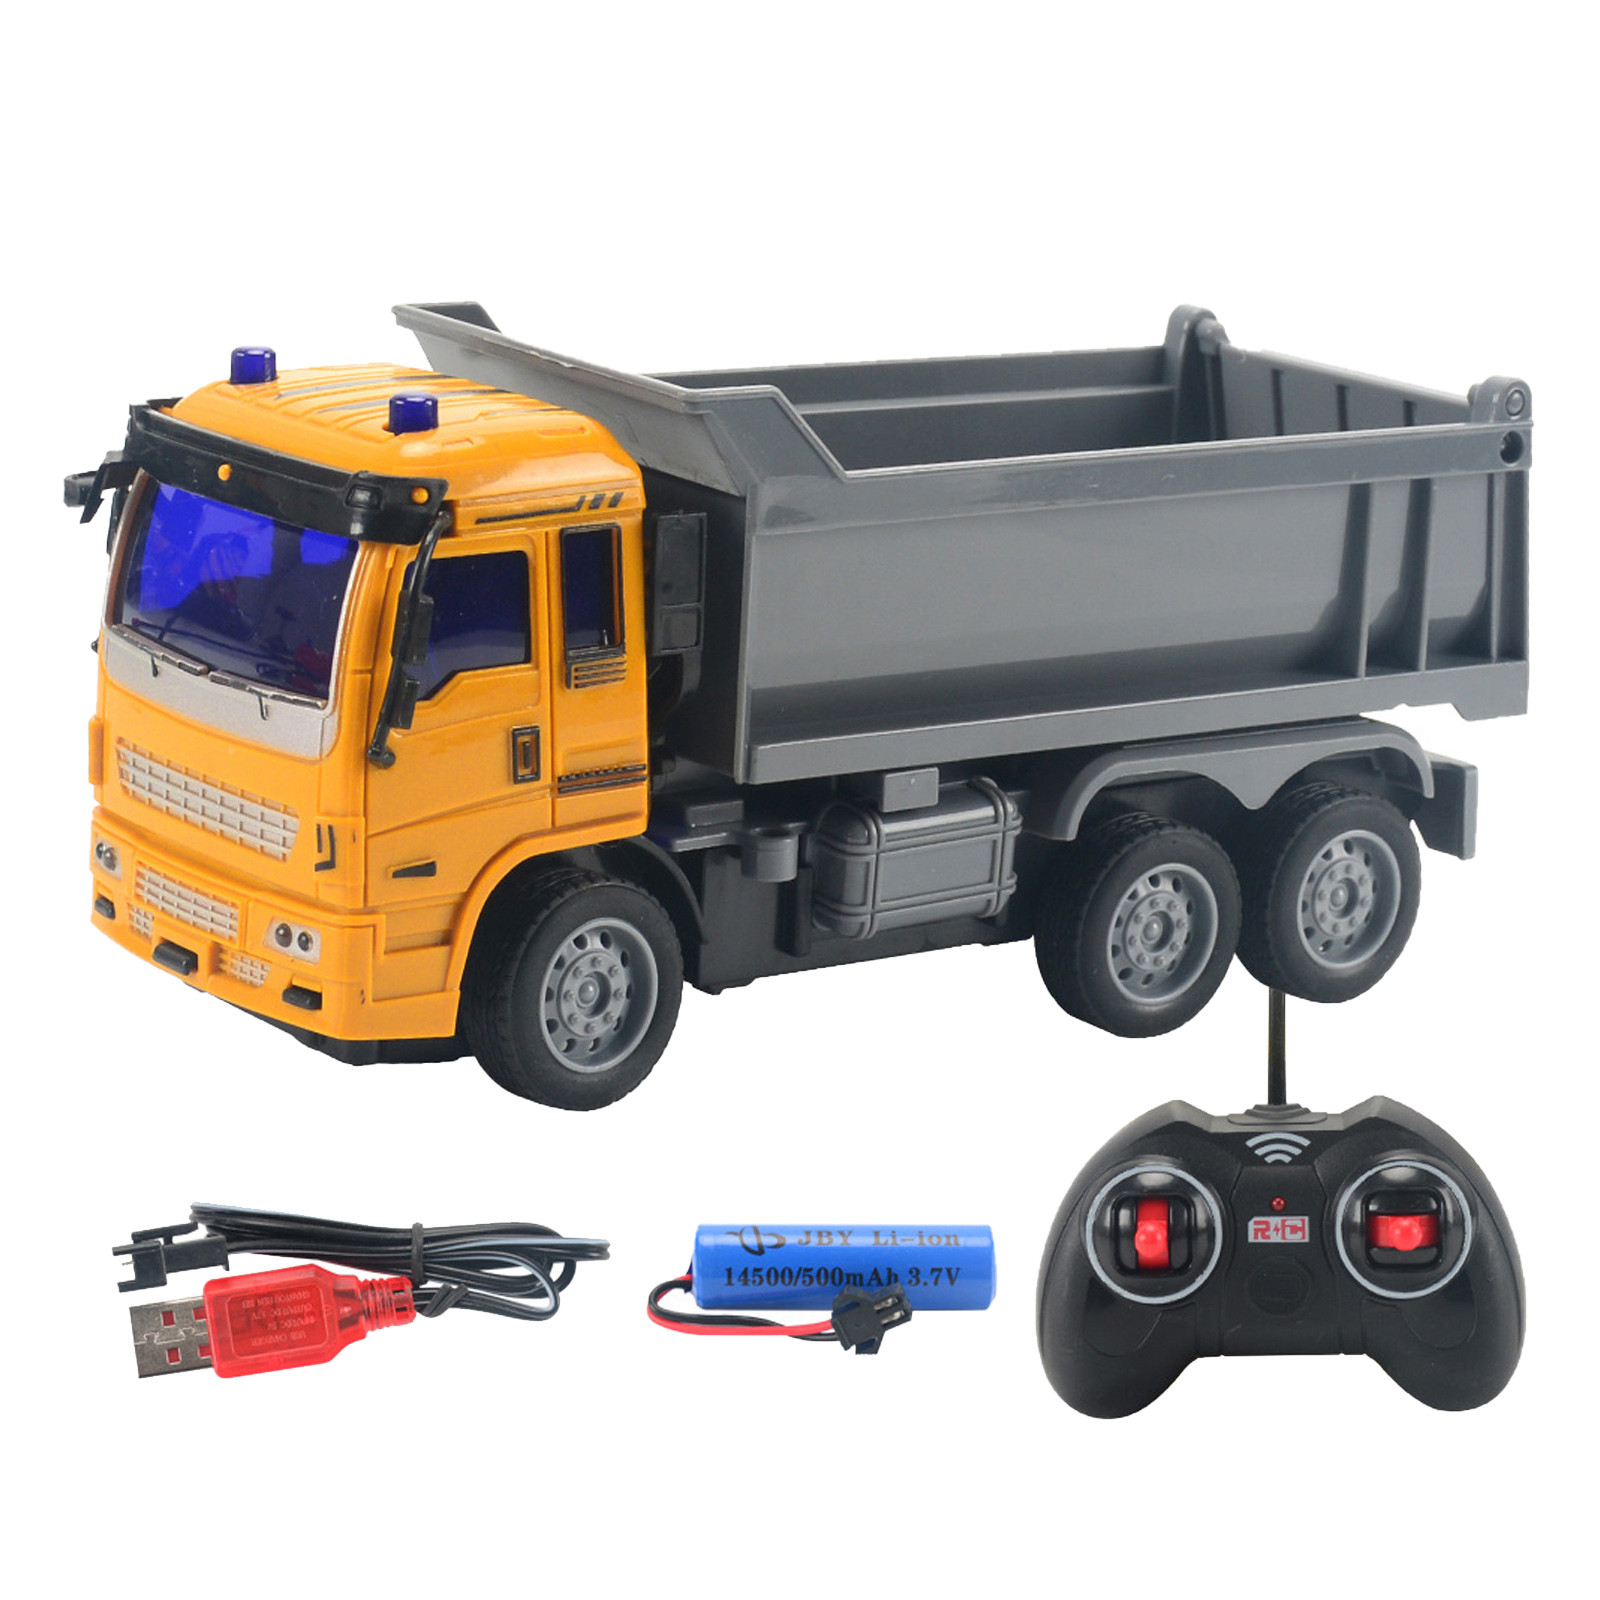 Engineering Vehicle Educational Toys Model Construction Vehicle Toy Model Plastic Children Doll Toys For Kids Girl Boy Gift